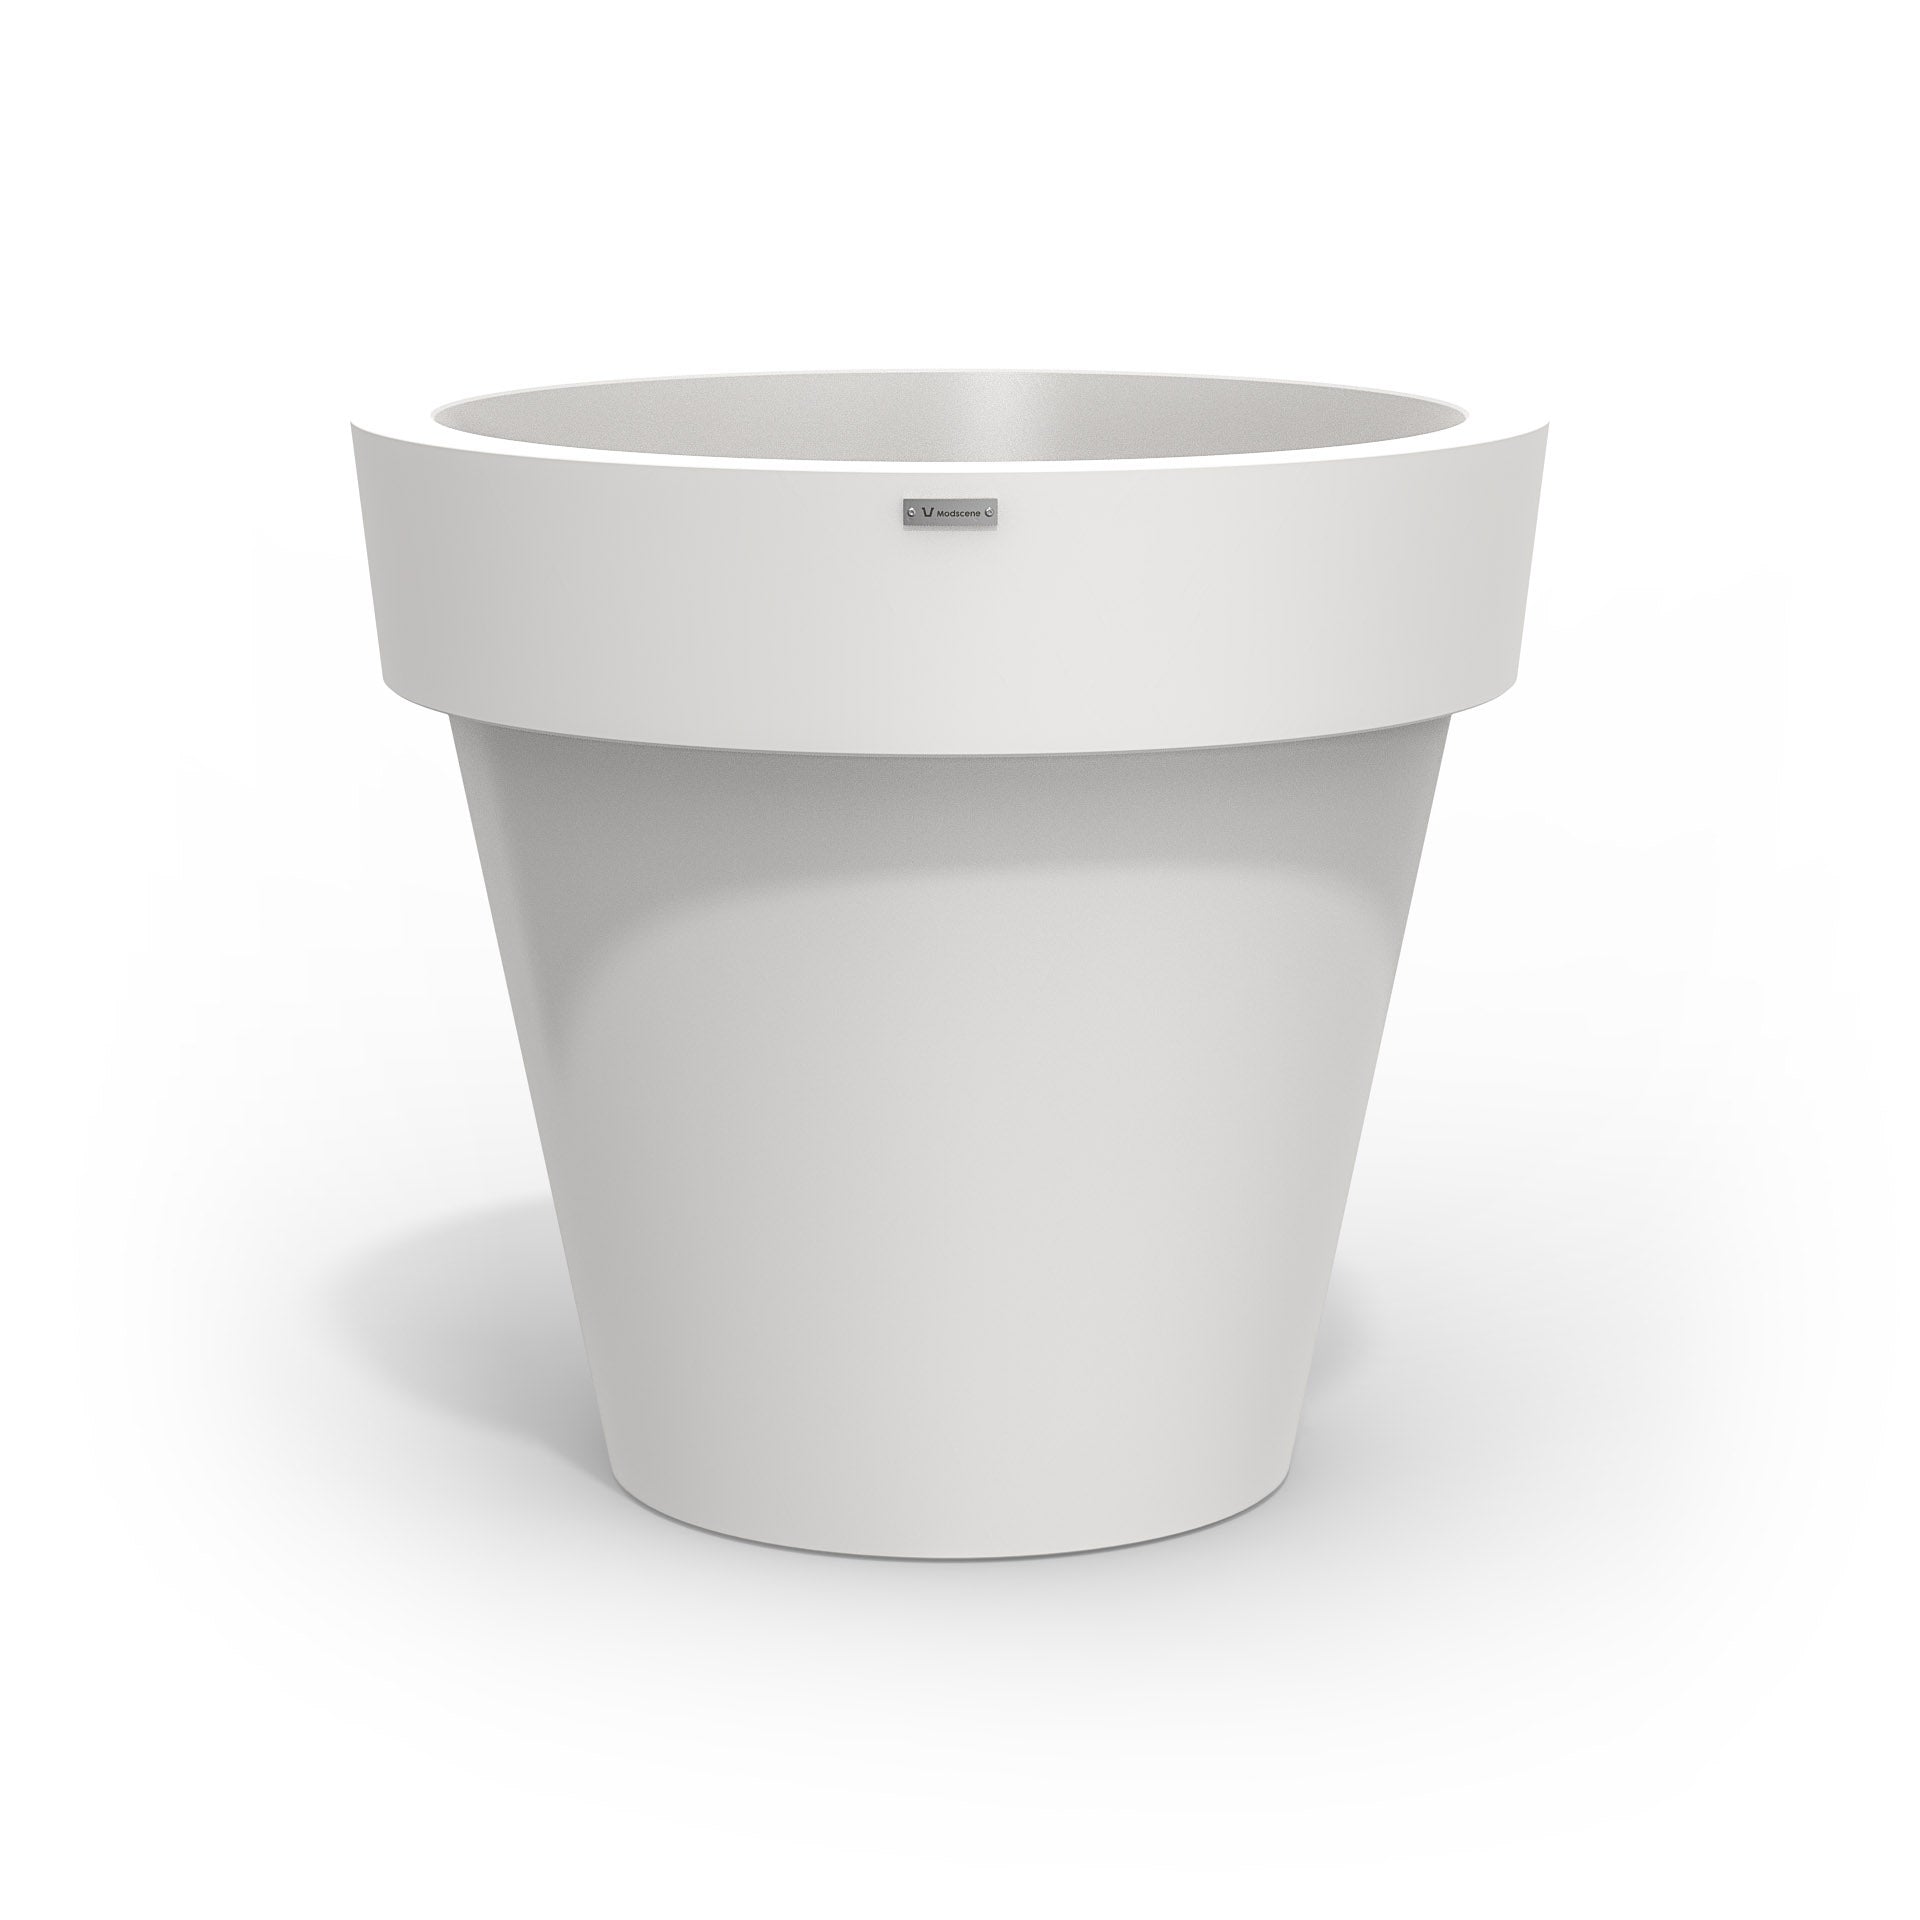 A white Modscene plastic planter pot that is large in size. New Zealand made.